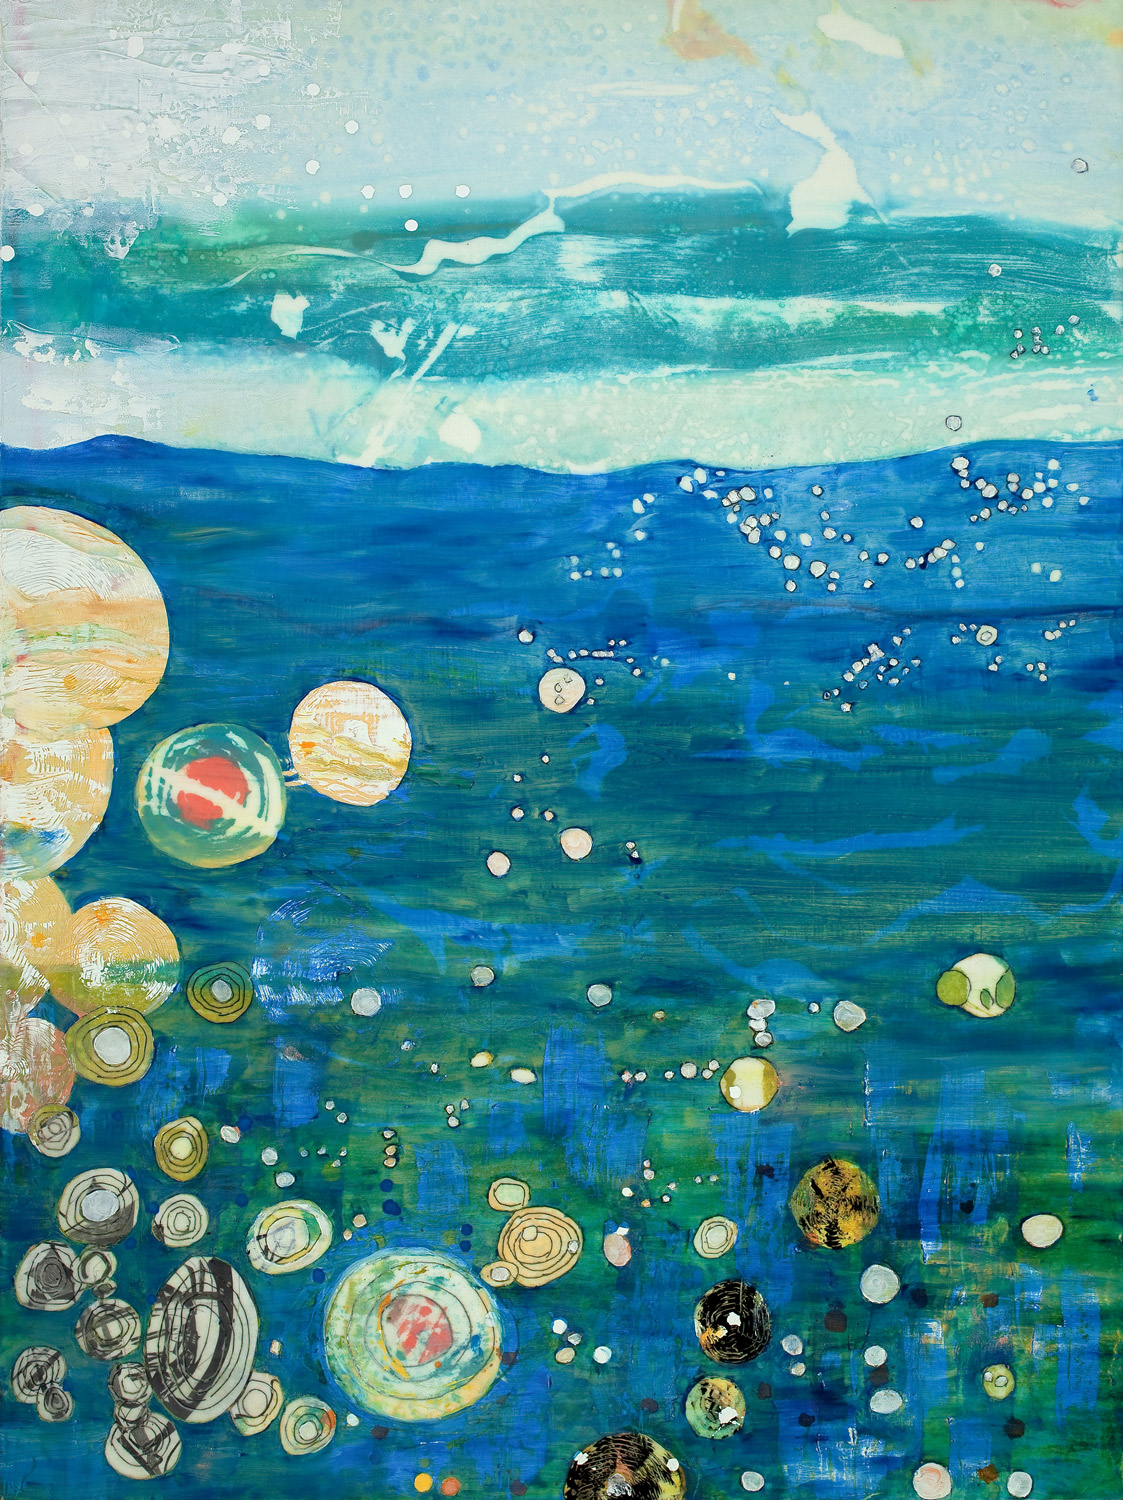 Bubbling Oceans 40 X 30 by Donna Johnson